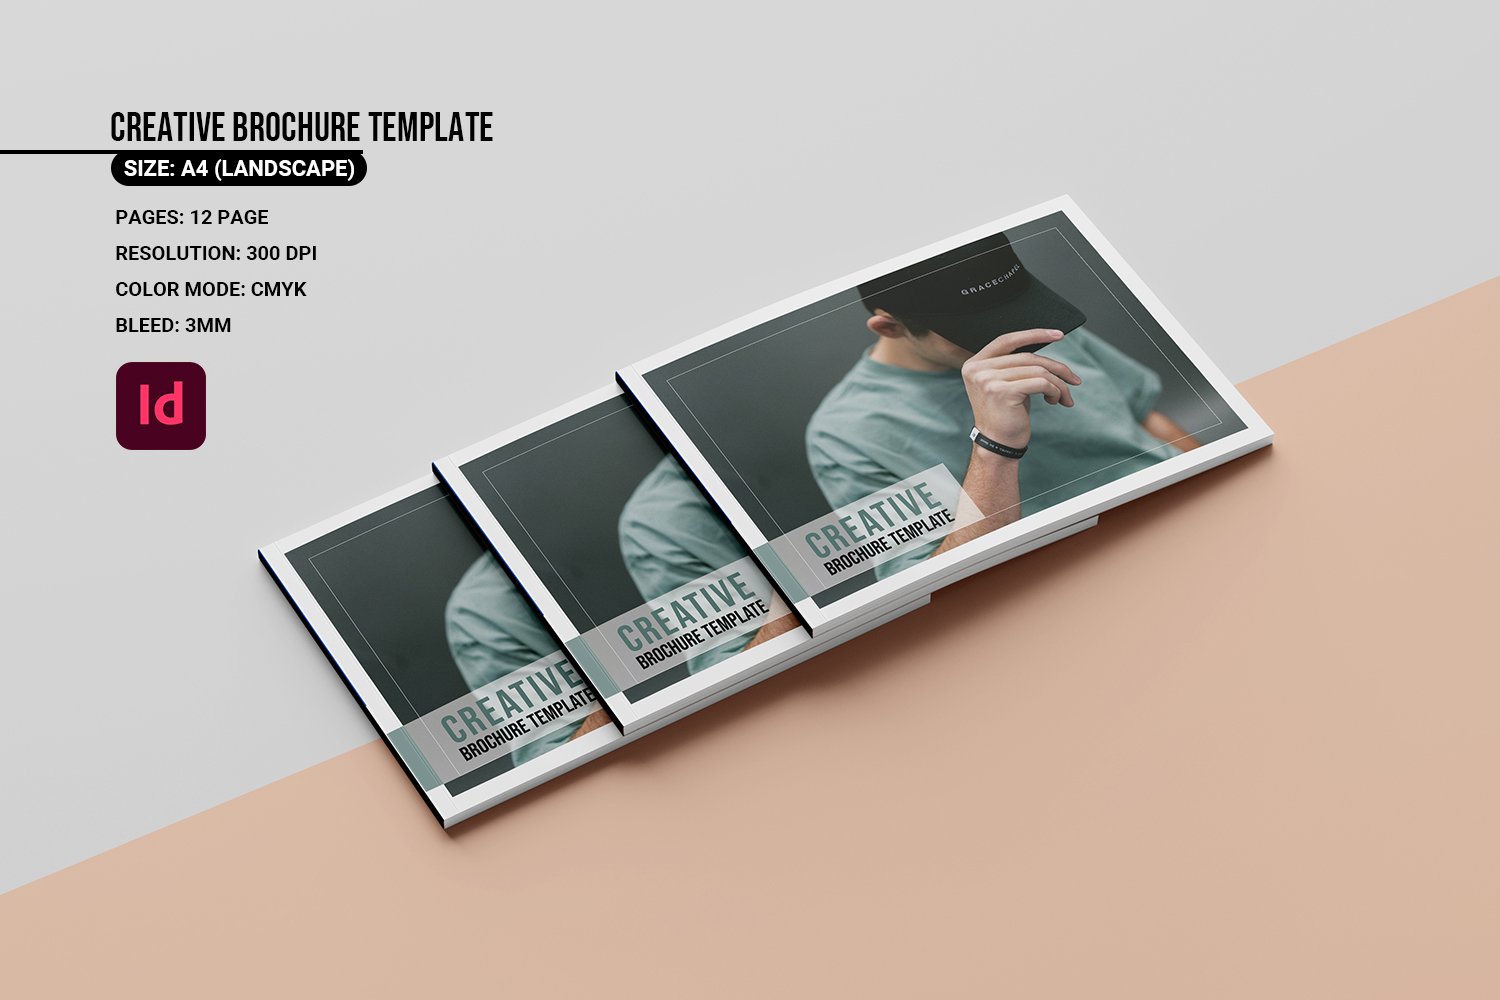 Creative Brochure Template cover image.